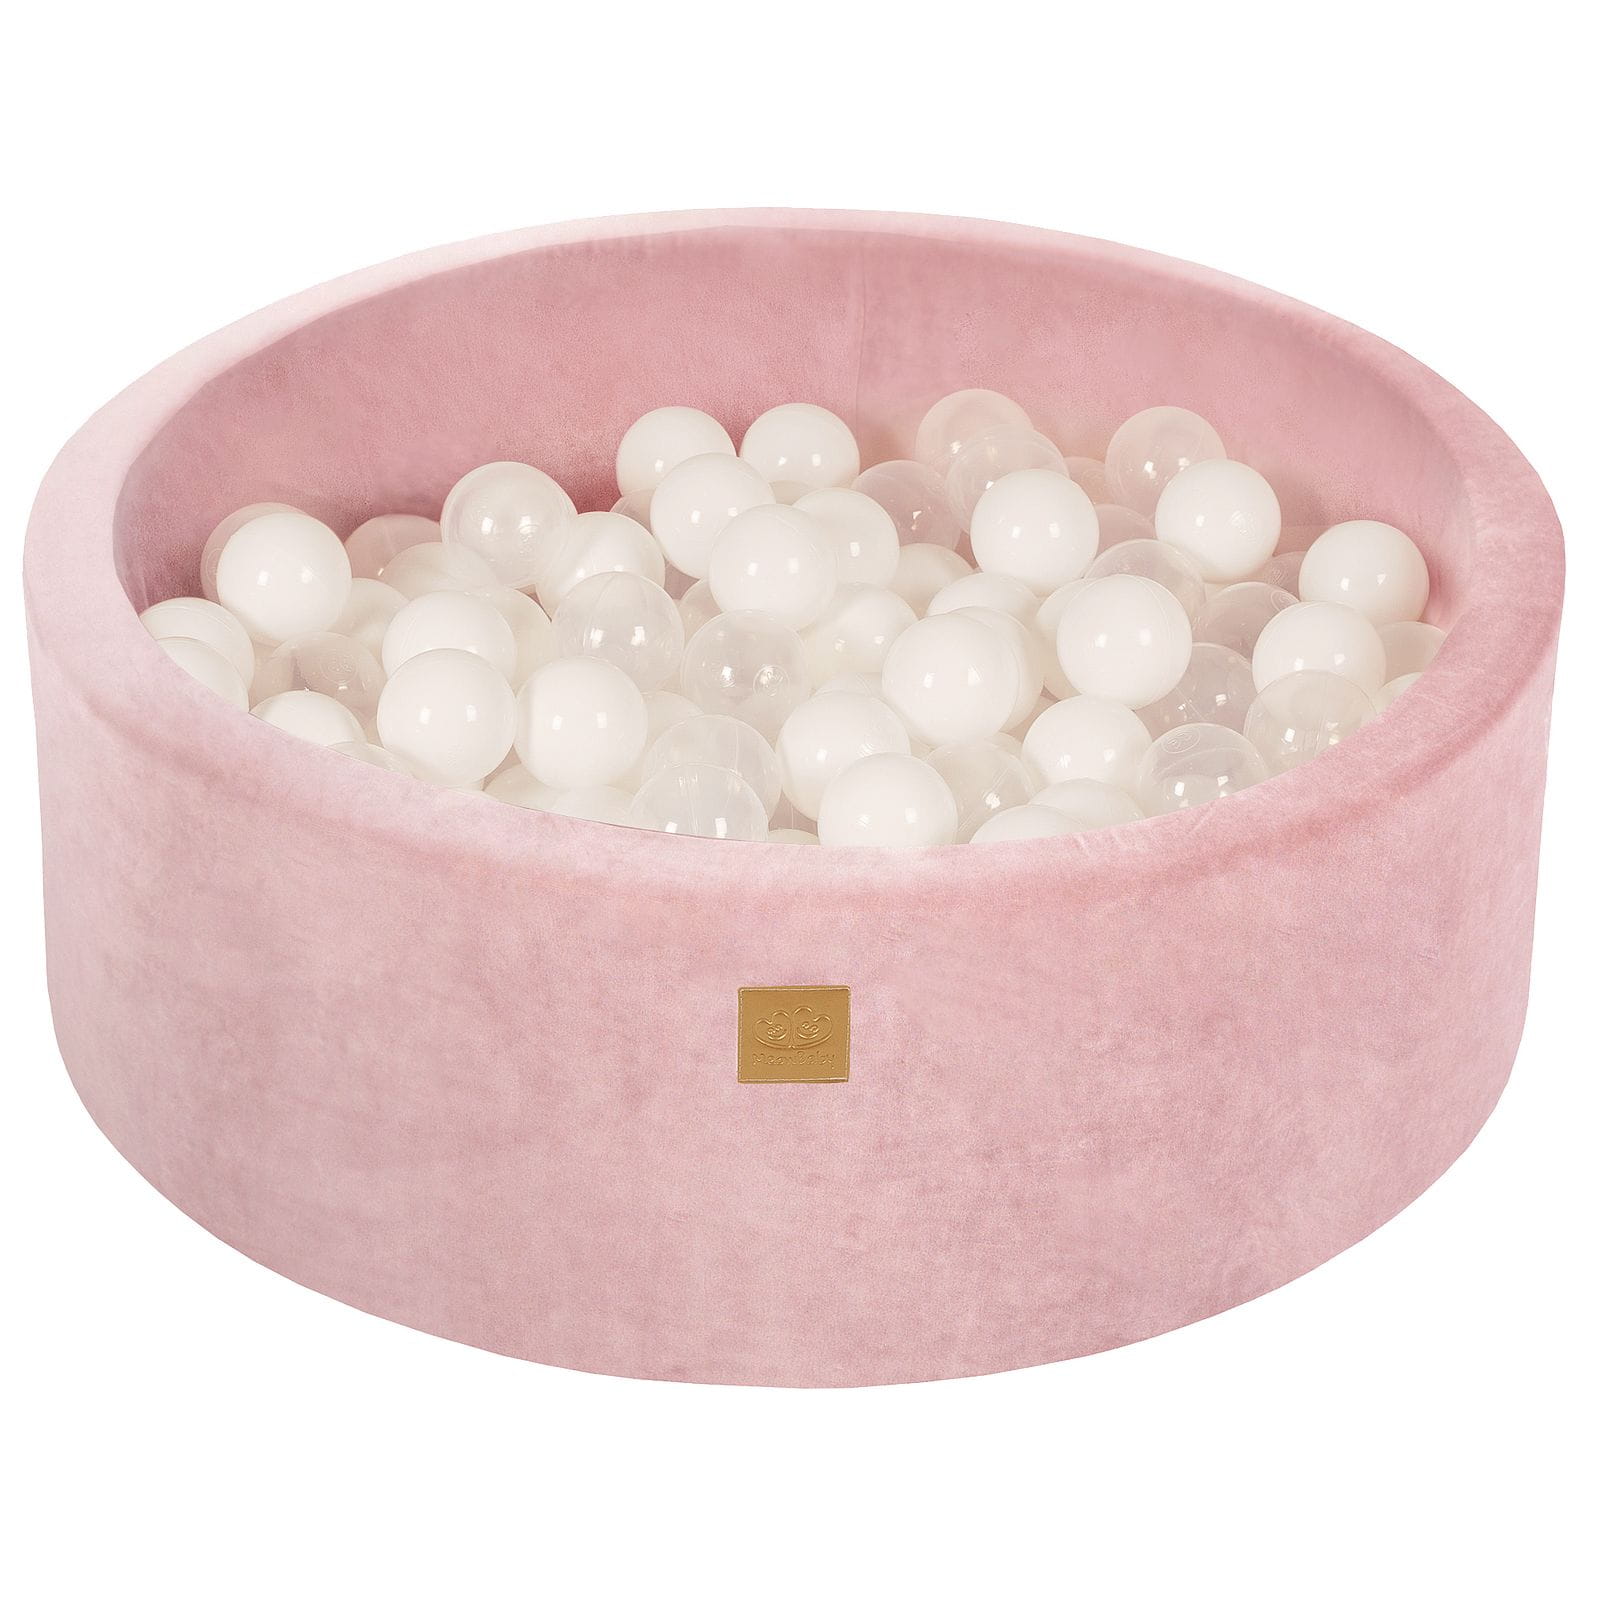 MEOW BABY Ball Pit with 200 Balls 2.75in Included for Toddlers - Baby Soft Foam Round Playpen, Velvet, Powder Pink: White/Transparent